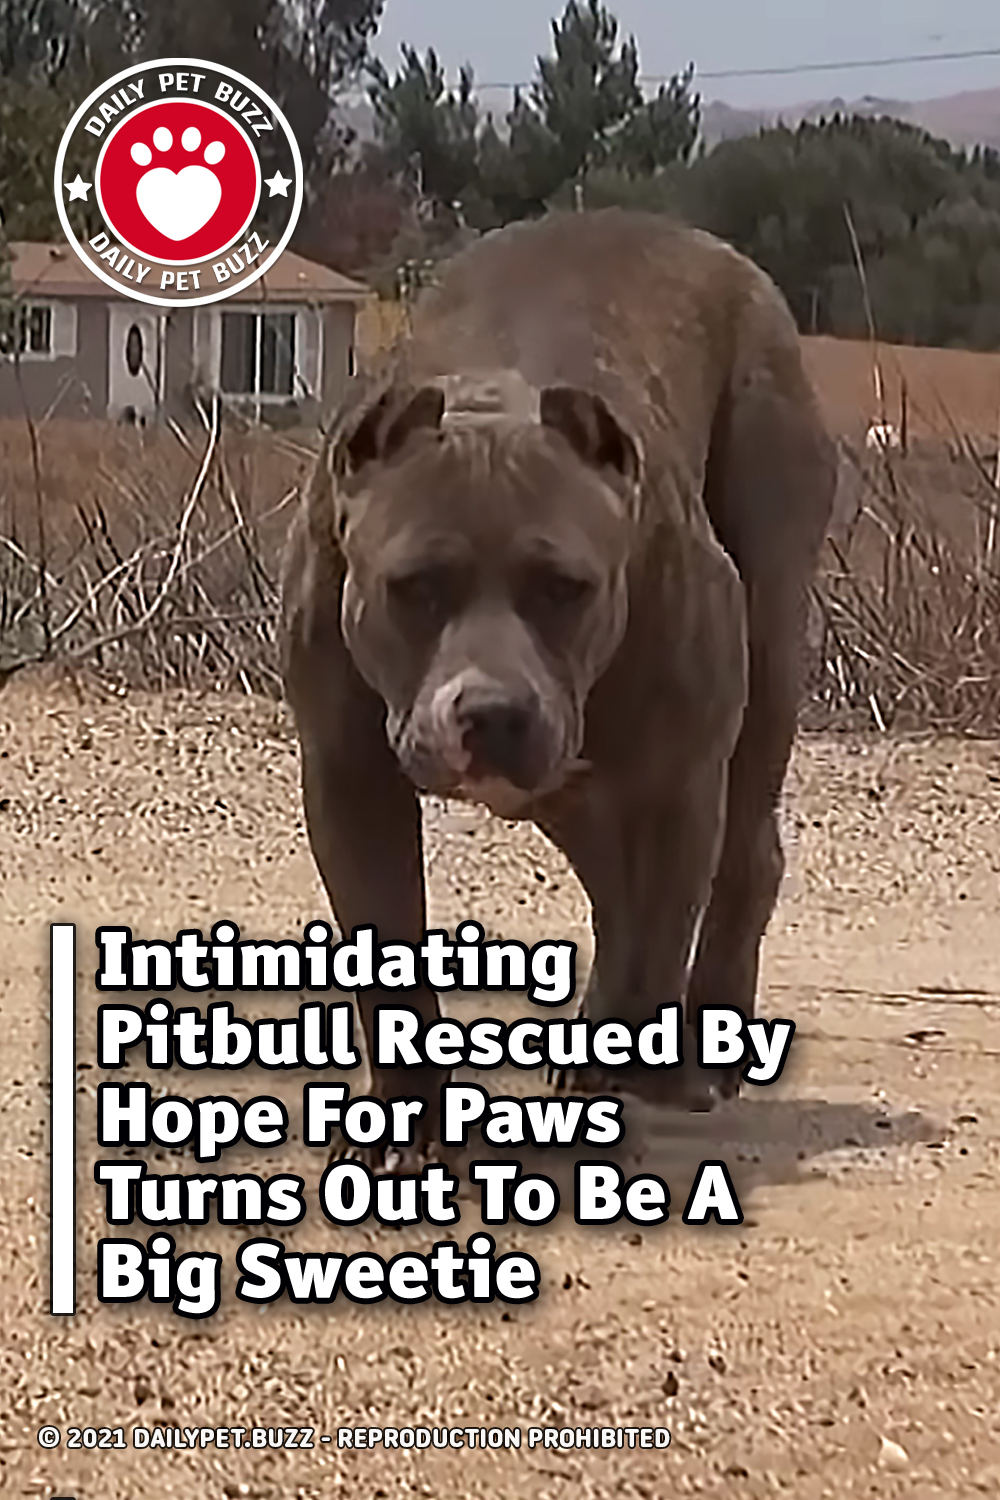 Intimidating Pitbull Rescued By Hope For Paws Turns Out To Be A Big Sweetie